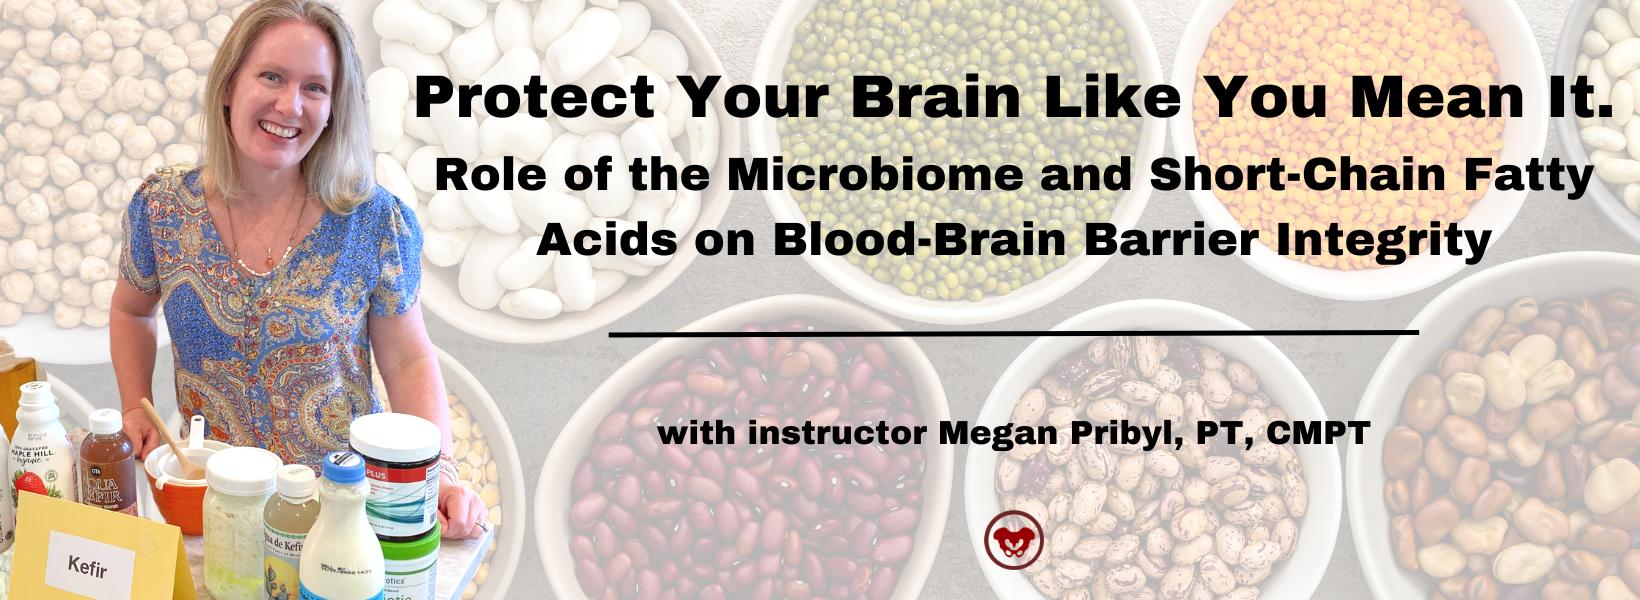 Protect Your Brain Like You Mean It.
Role of the Microbiome and Short-Chain Fatty Acids 
on Blood-Brain Barrier Integrity